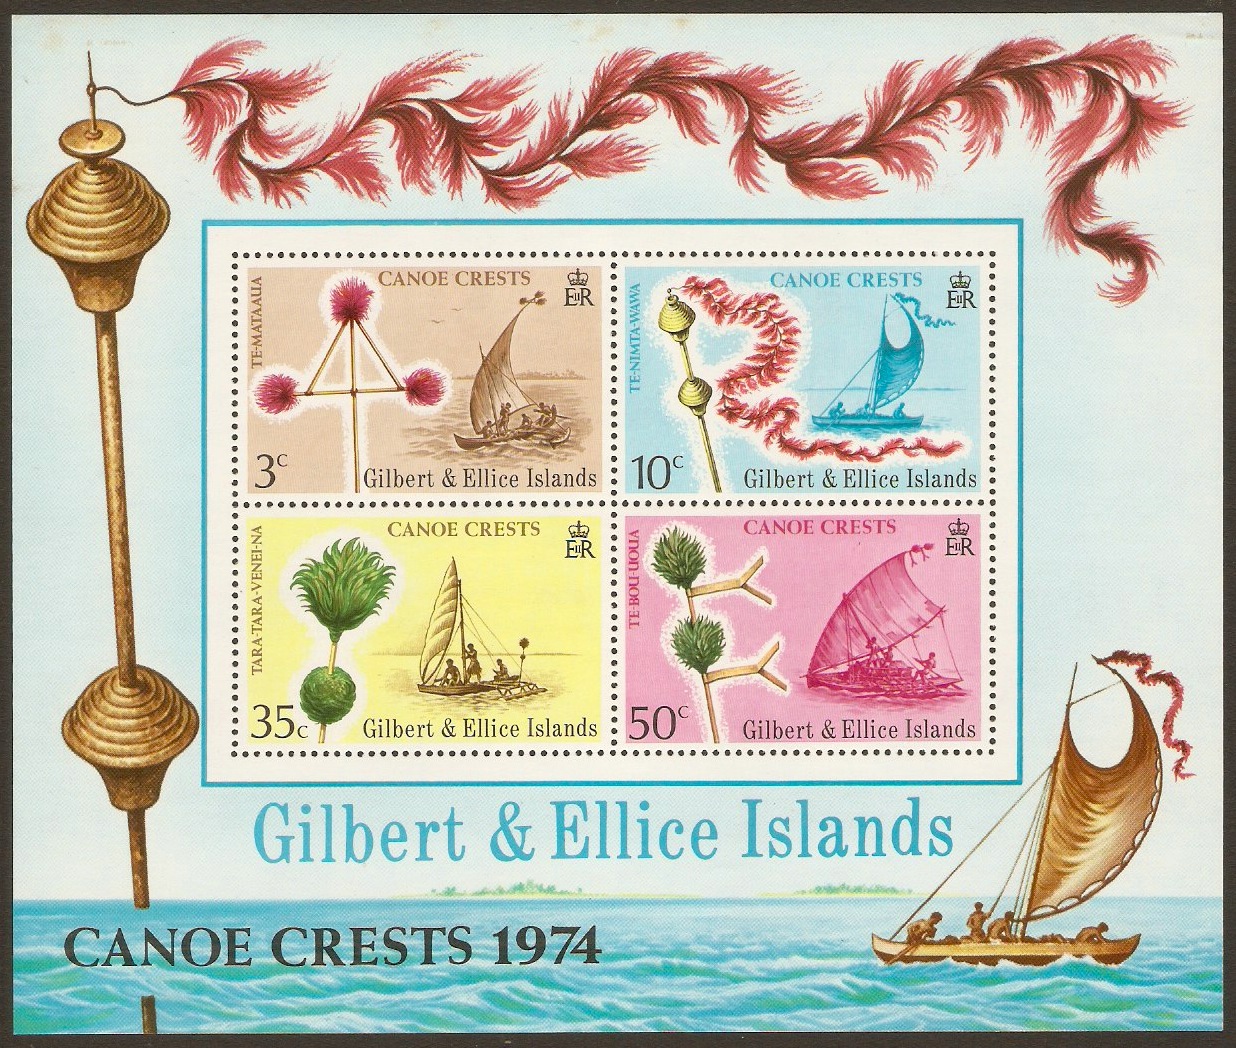 Gilbert and Ellice 1974 Canoe Crests Sheet. SGMS231.